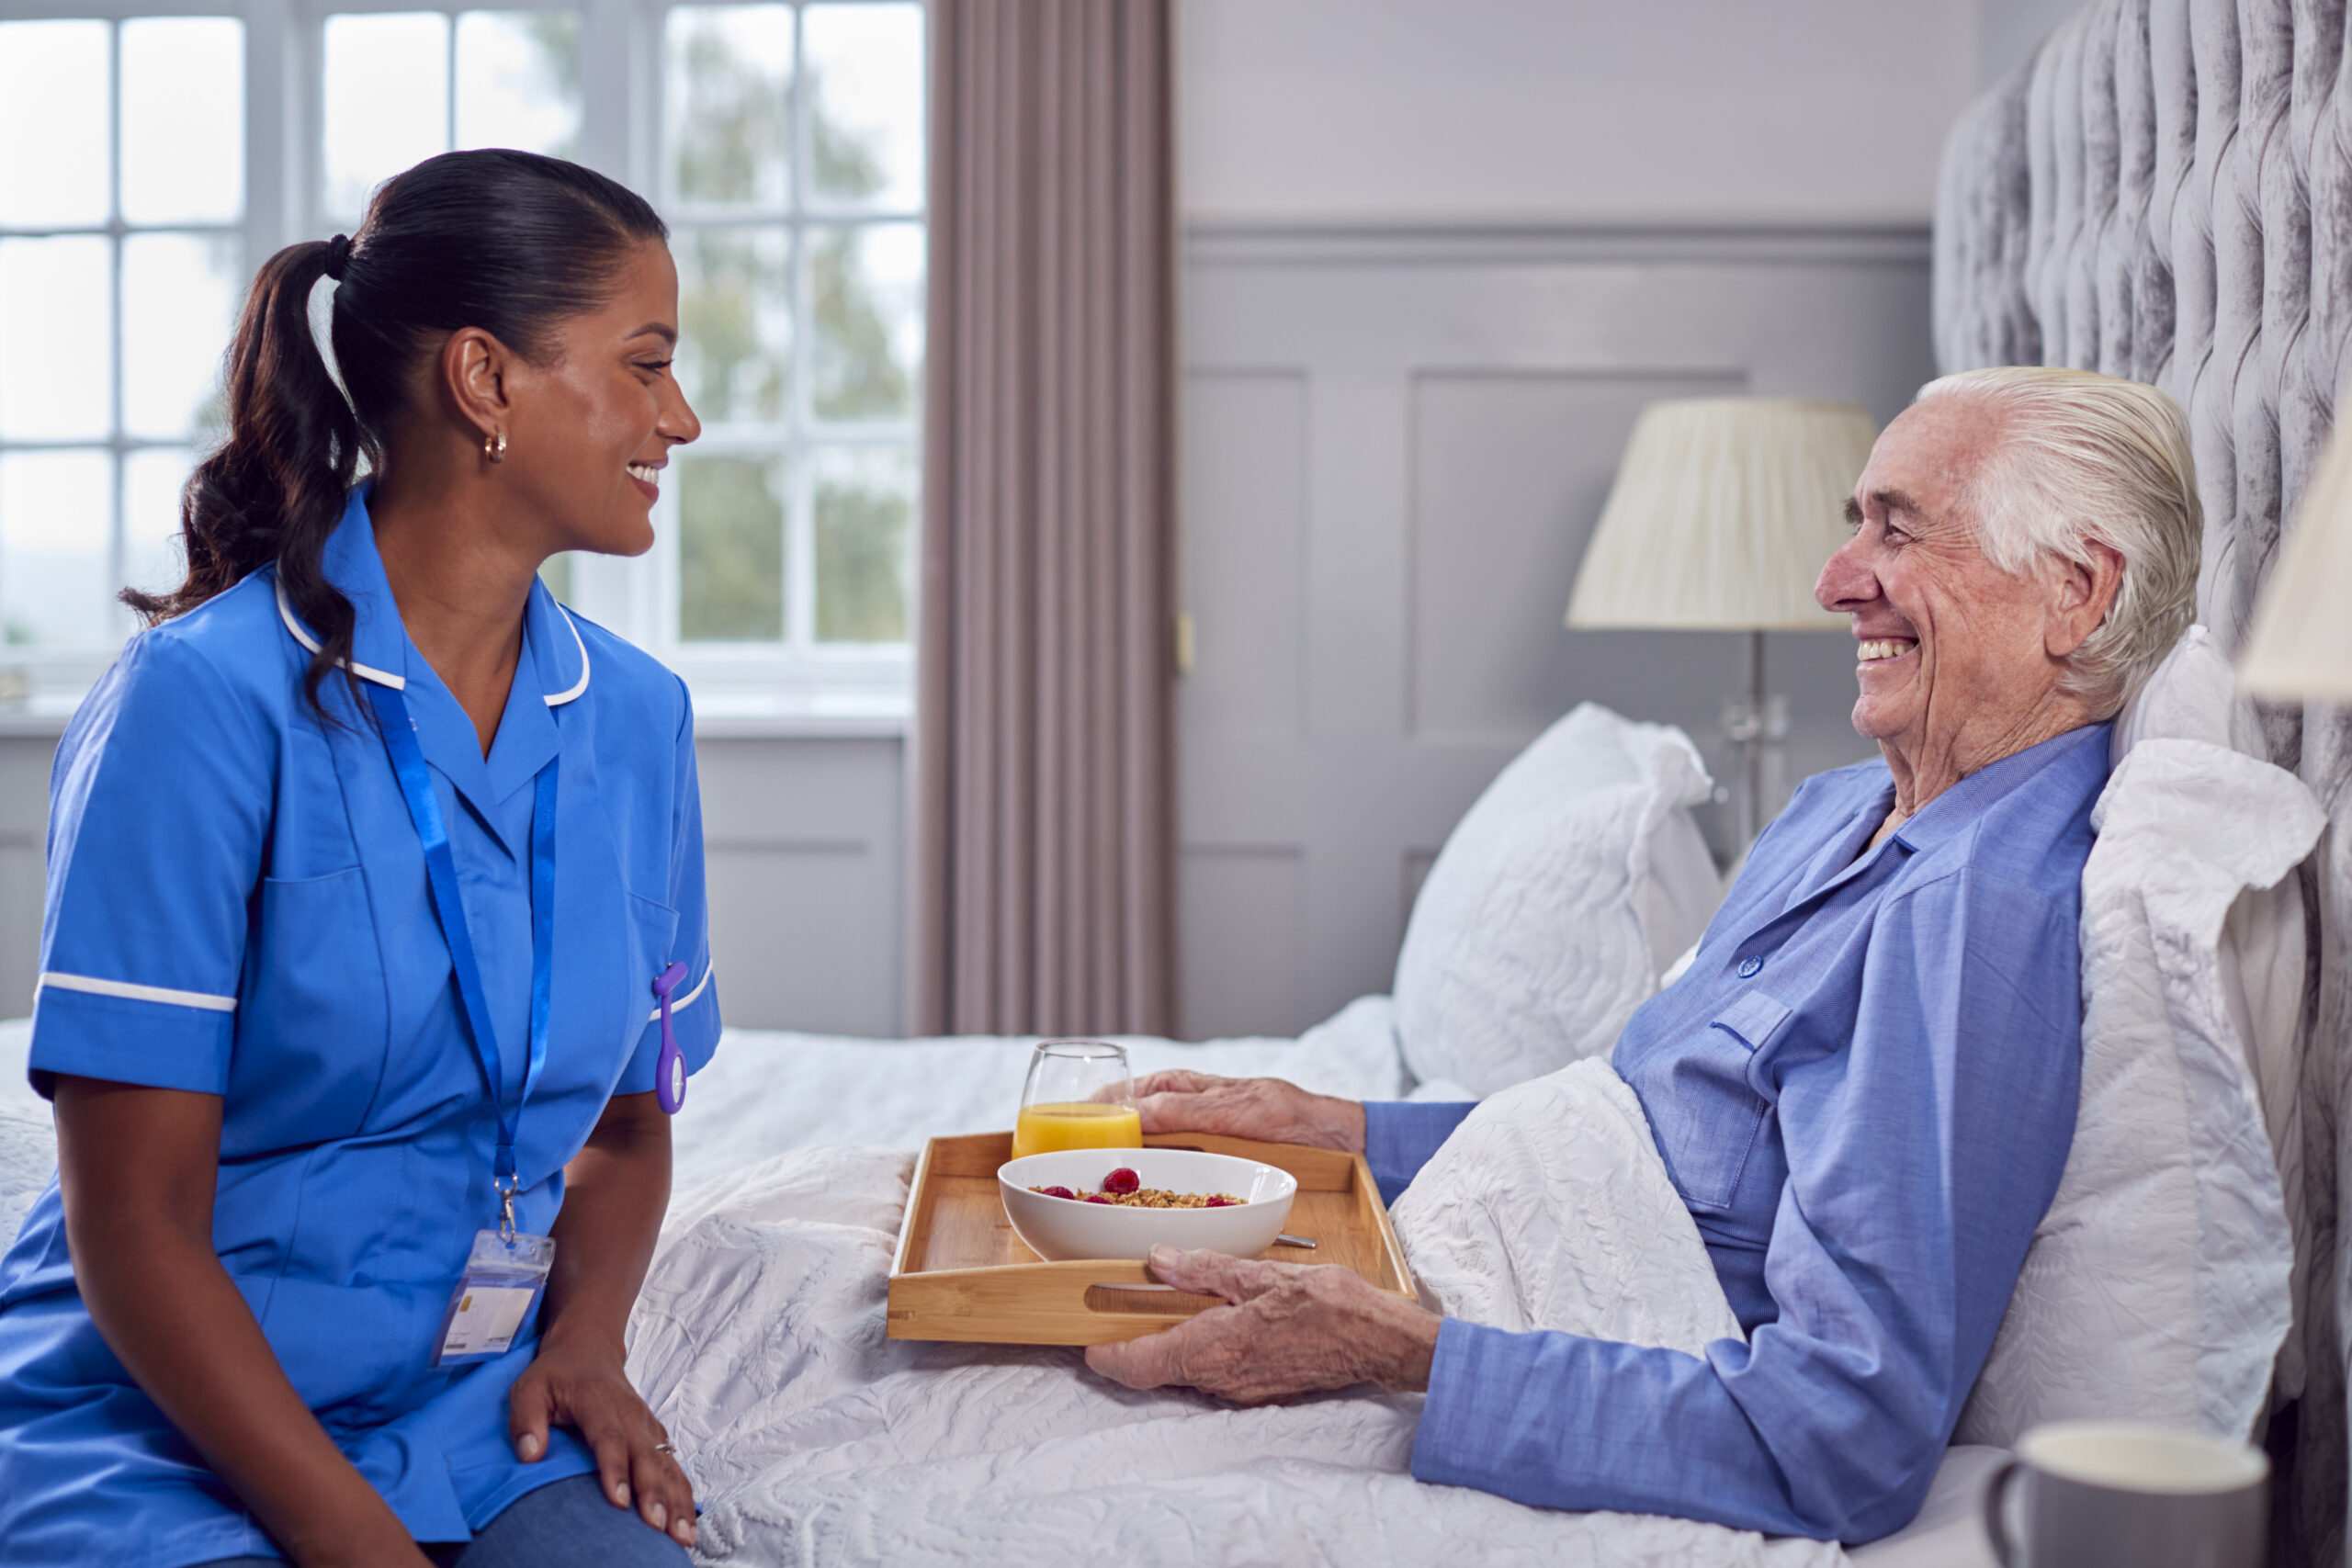 Female Care Worker In Uniform Bringing Senior Man At Home Breakfast In Bed On Tray